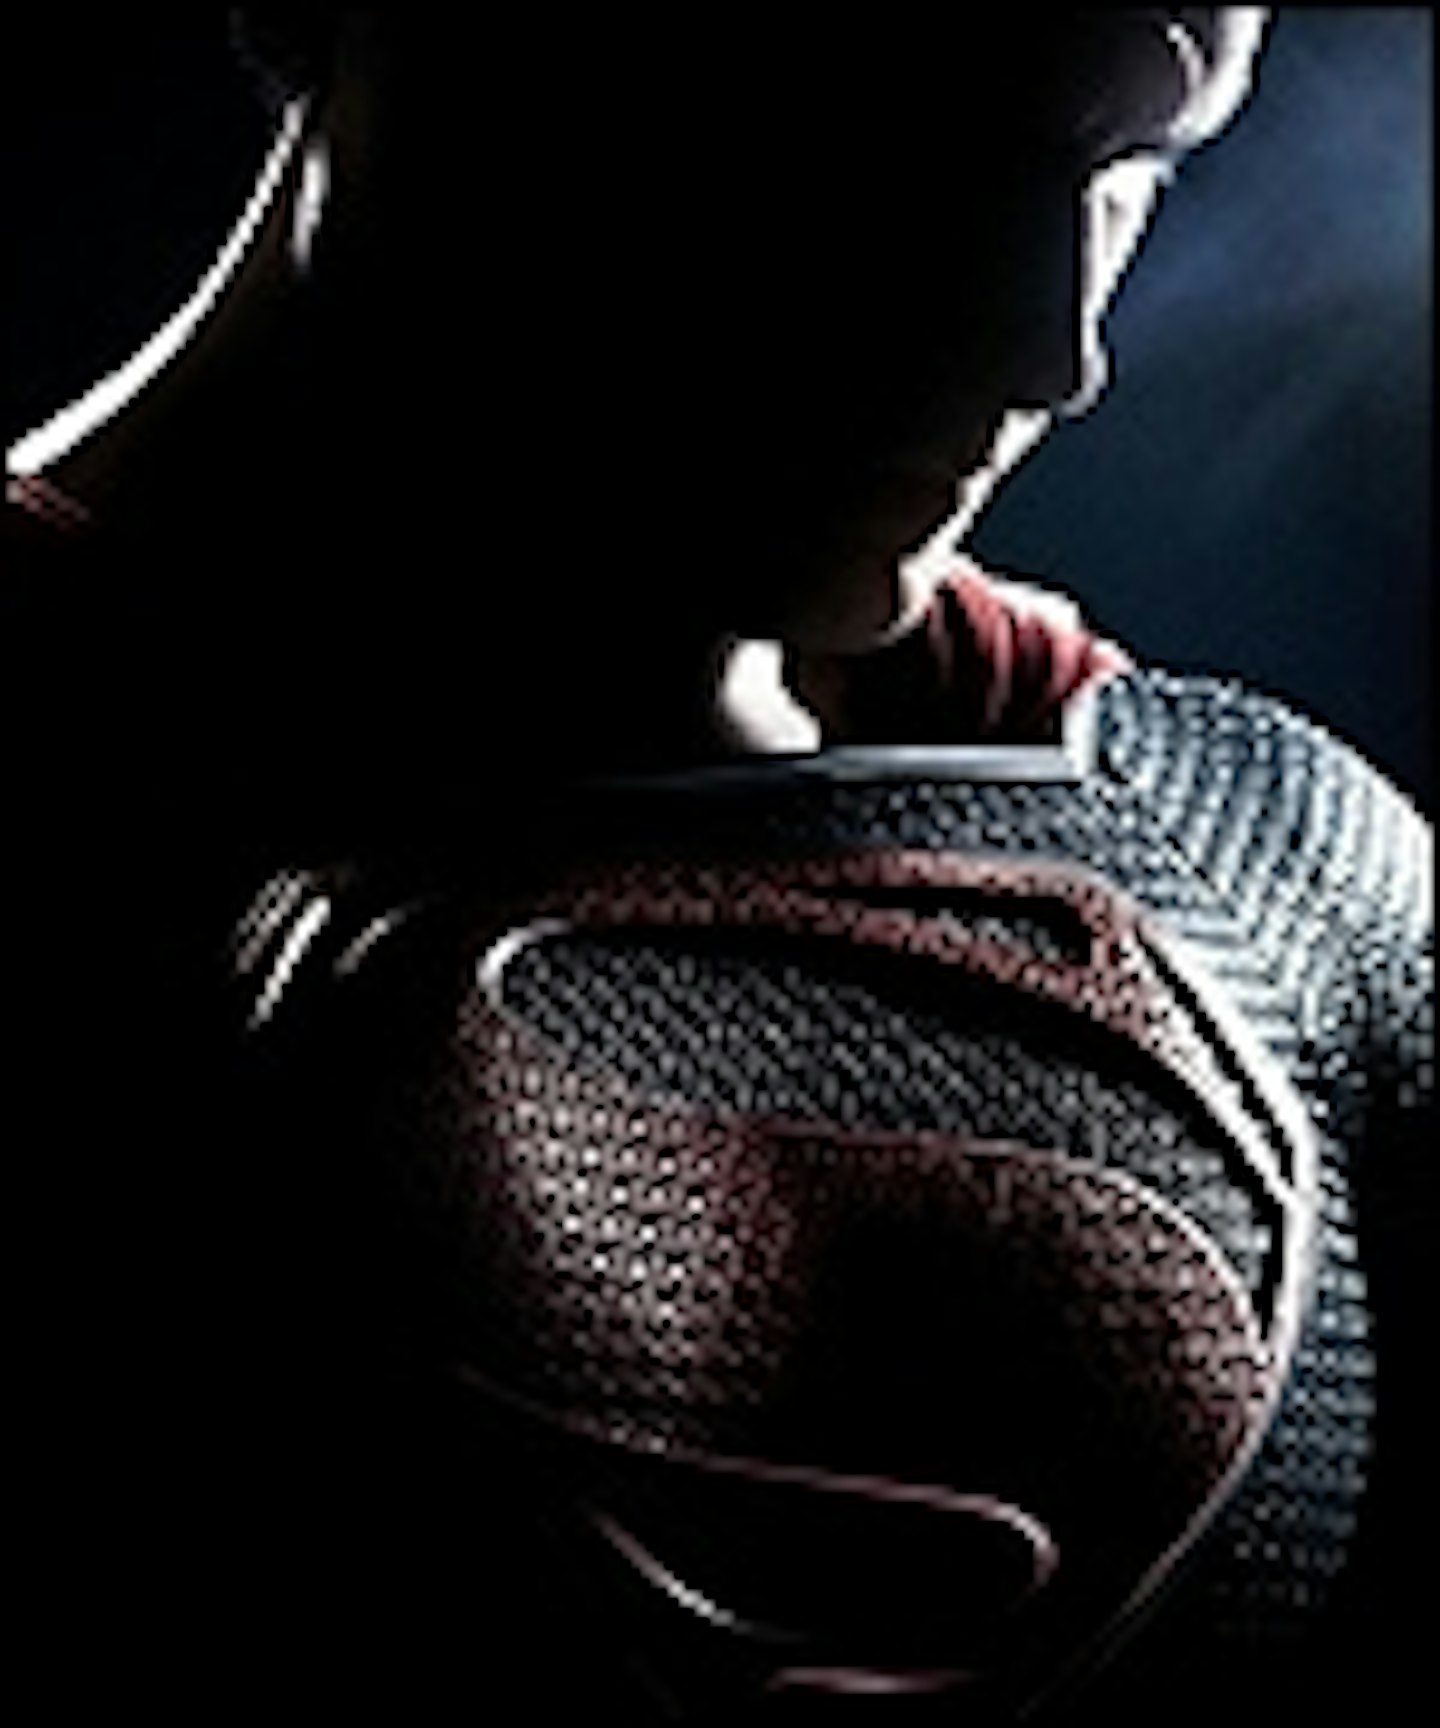 George Miller To Direct Man Of Steel Sequel?